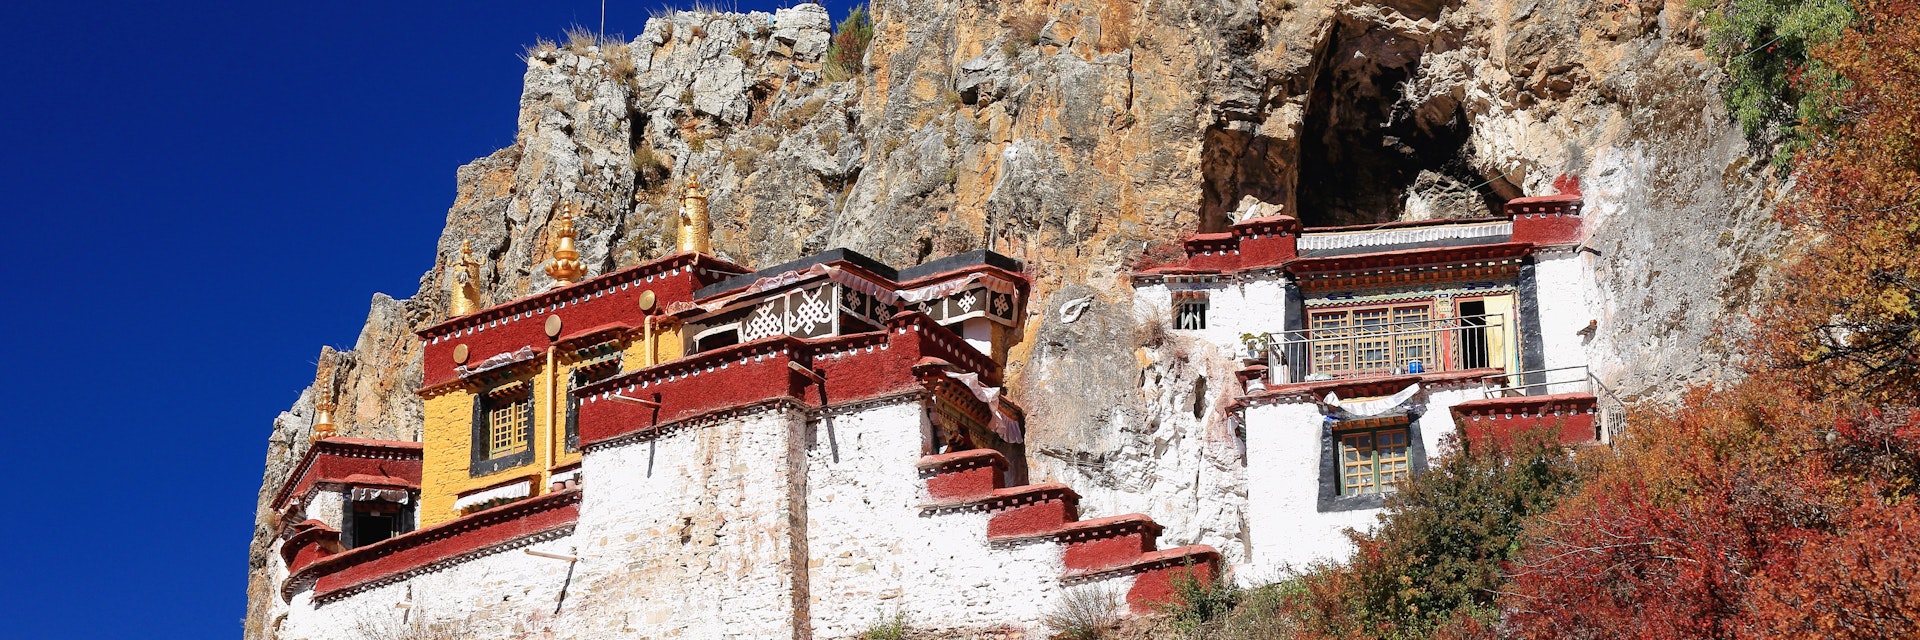 Lhakhang Puk-cave. Here Lhalung Pelgyi Dorje is said to have meditated for 22 years beginnign in 842 AD. Drak Yerpa monast.-complex of more than 80 meditation caves. Lhasa pref.-Tibet.